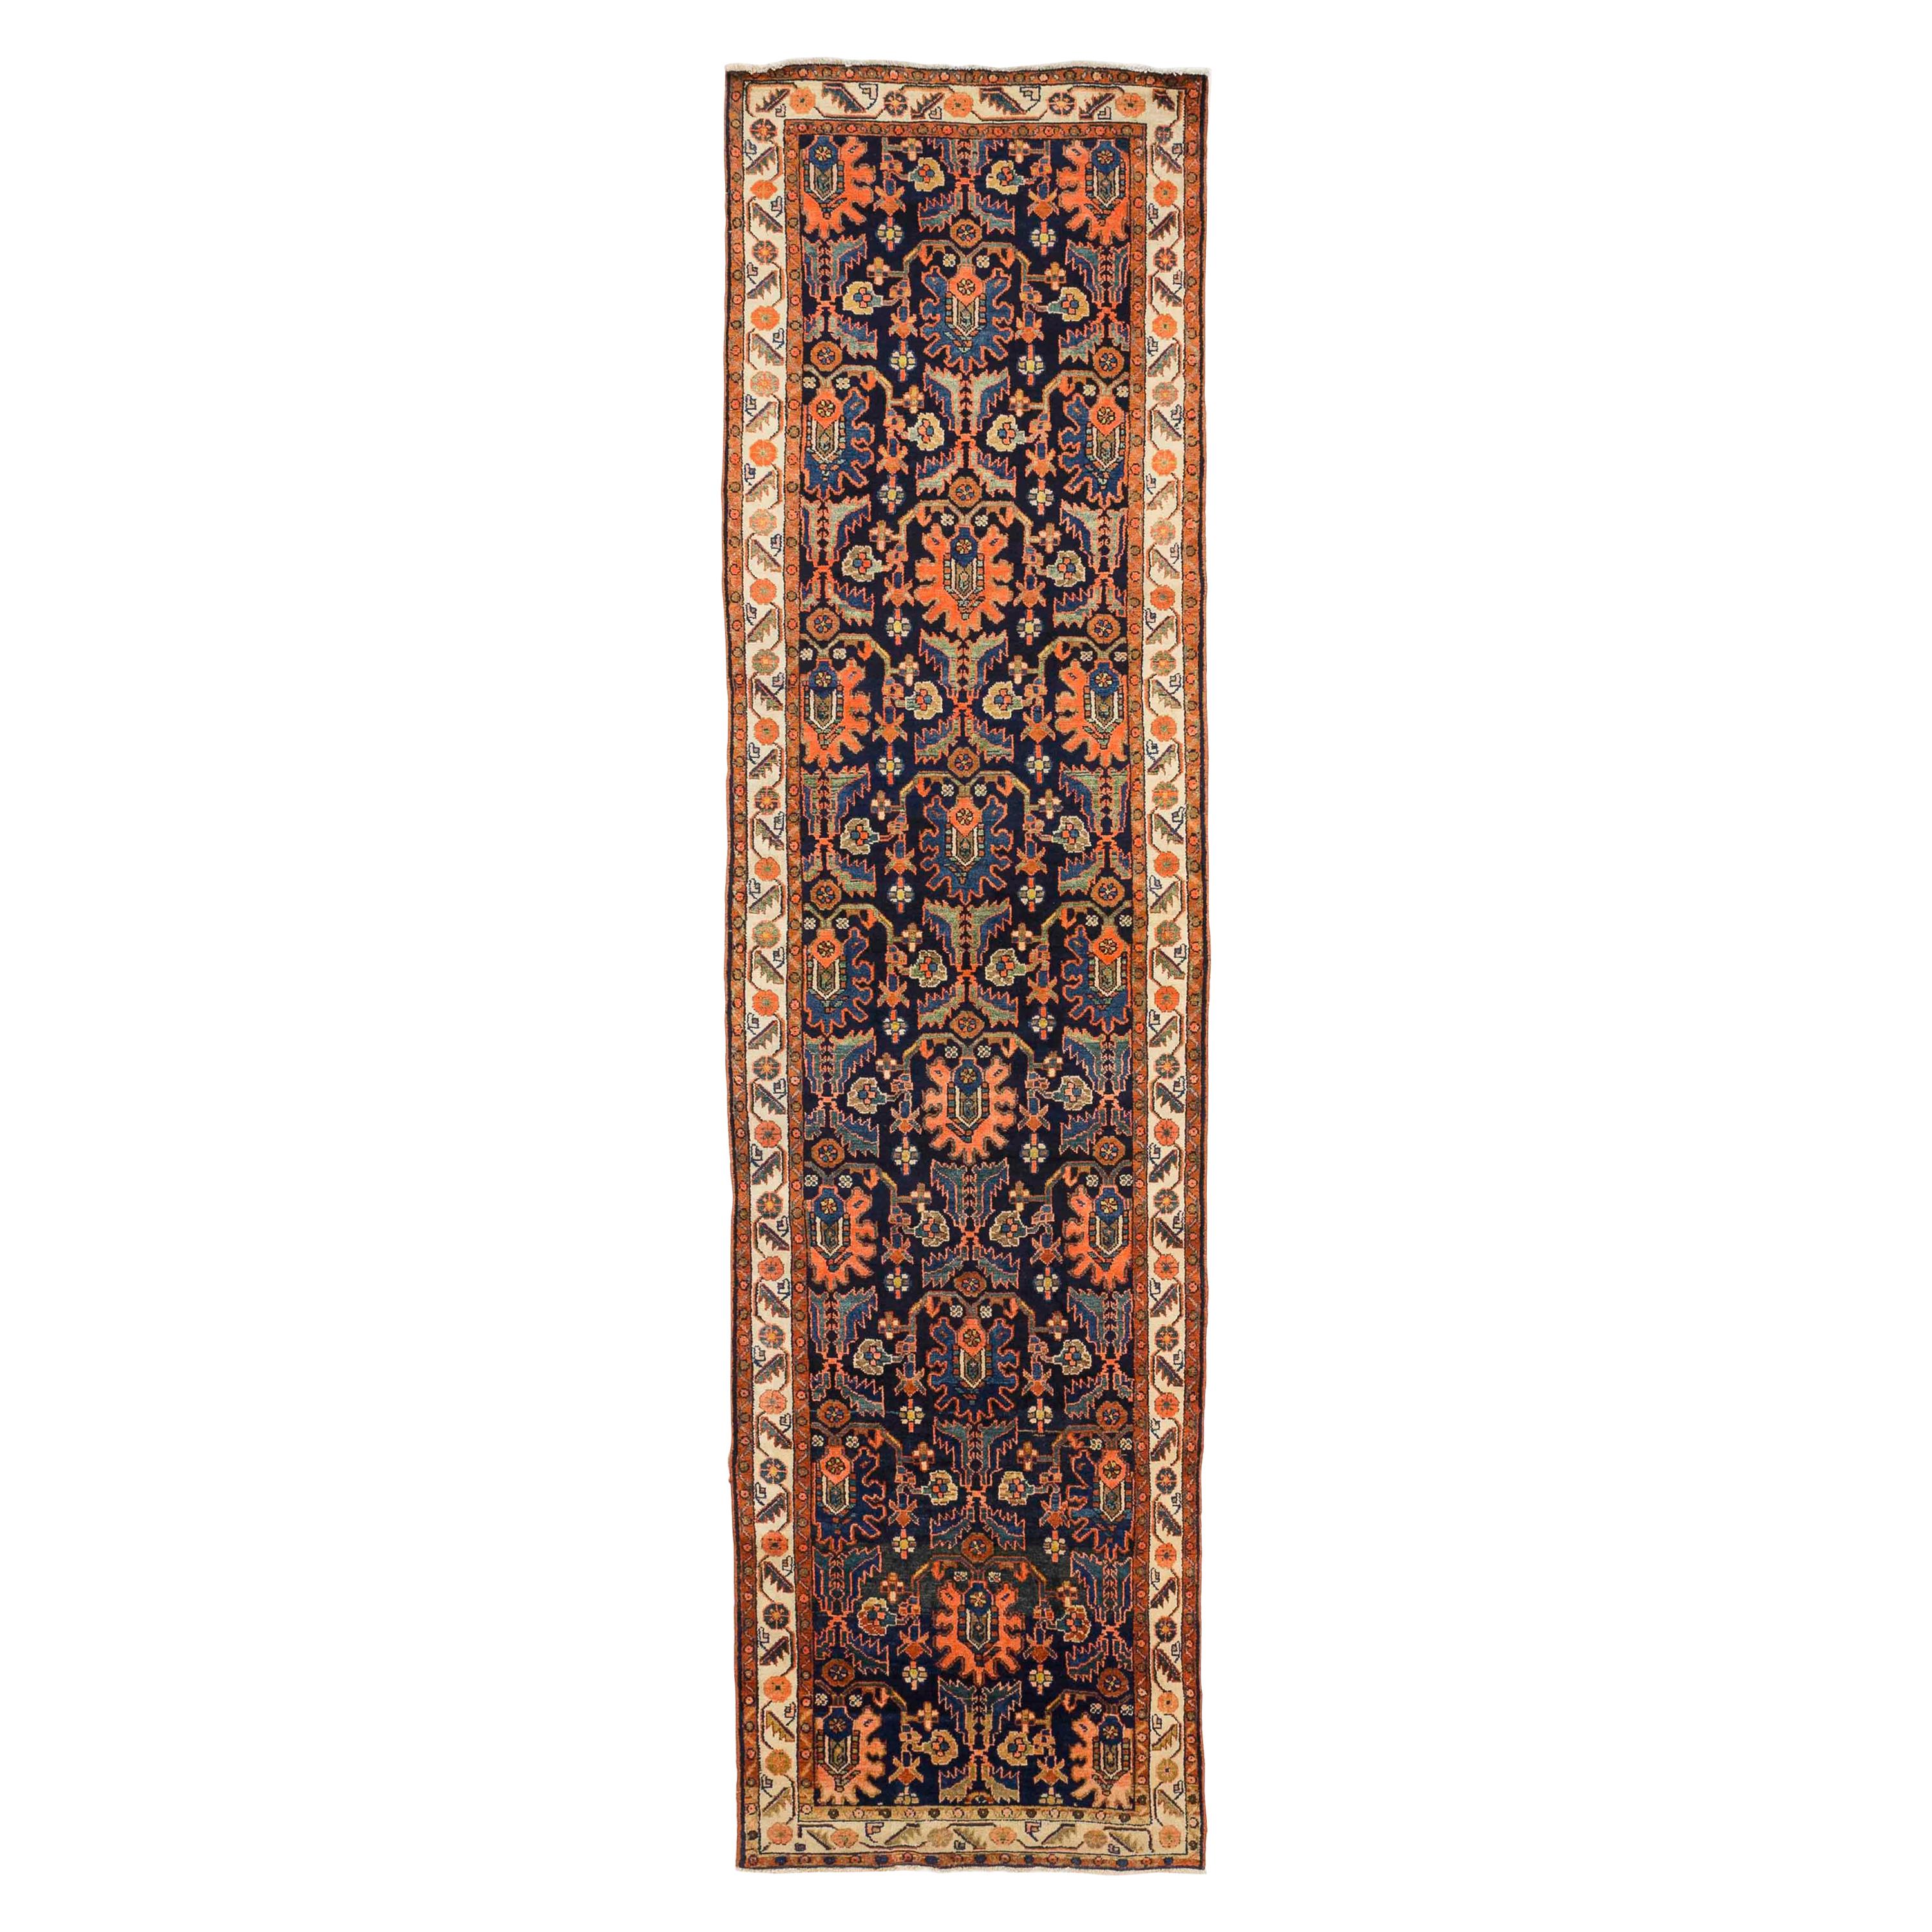 Antique Persian Malayer Runner Rug with Tribal Details in Red, Blue and Ivory